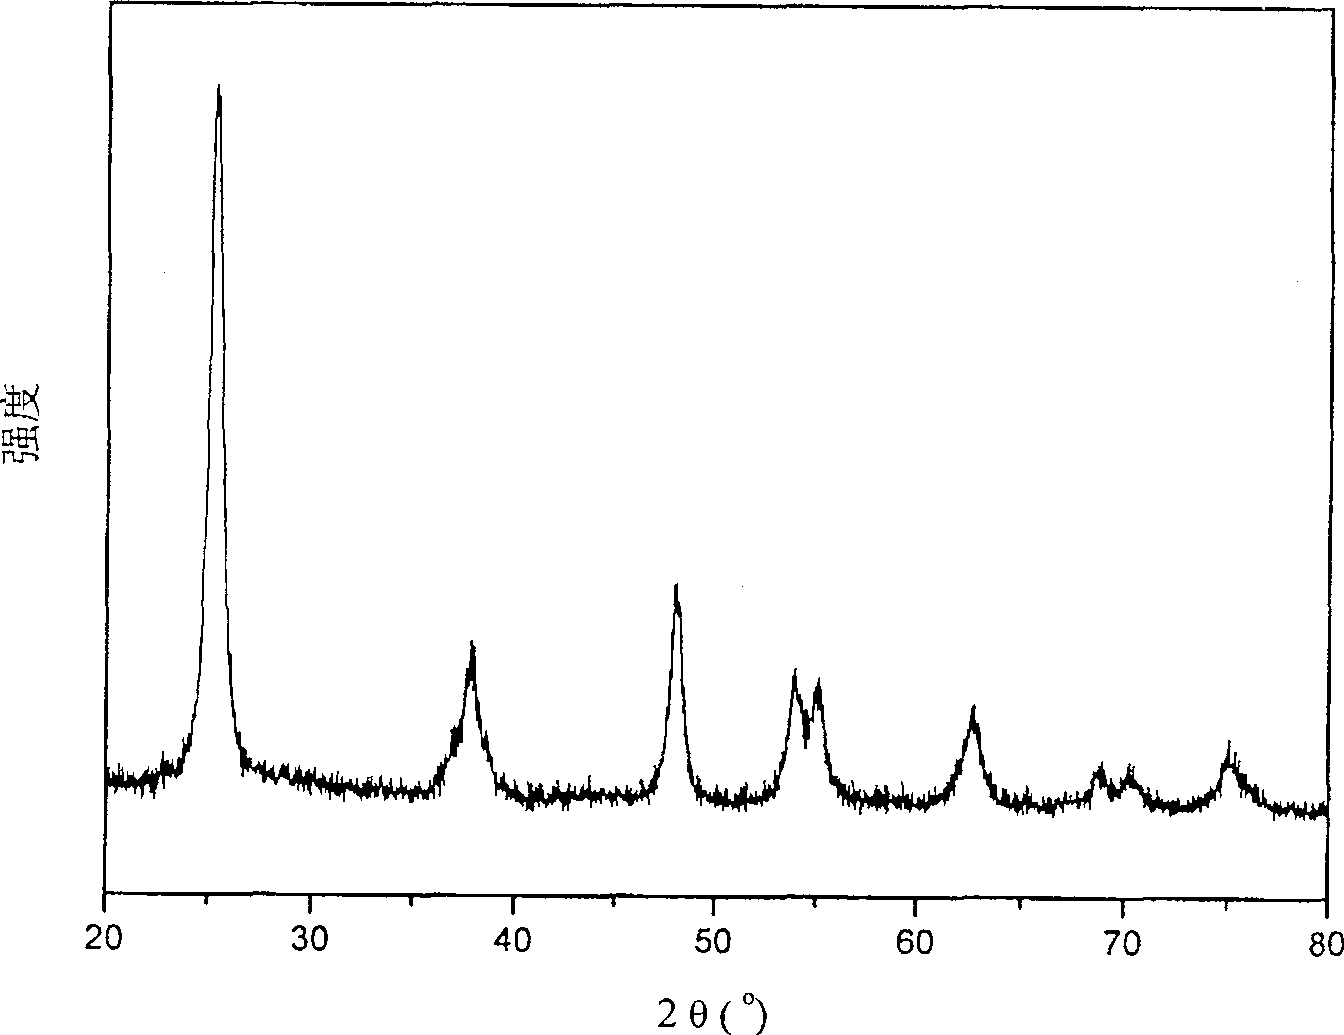 Cation S and anion N doped one-dimensional nano-structured Ti0* photocatalyst and method of producing the same